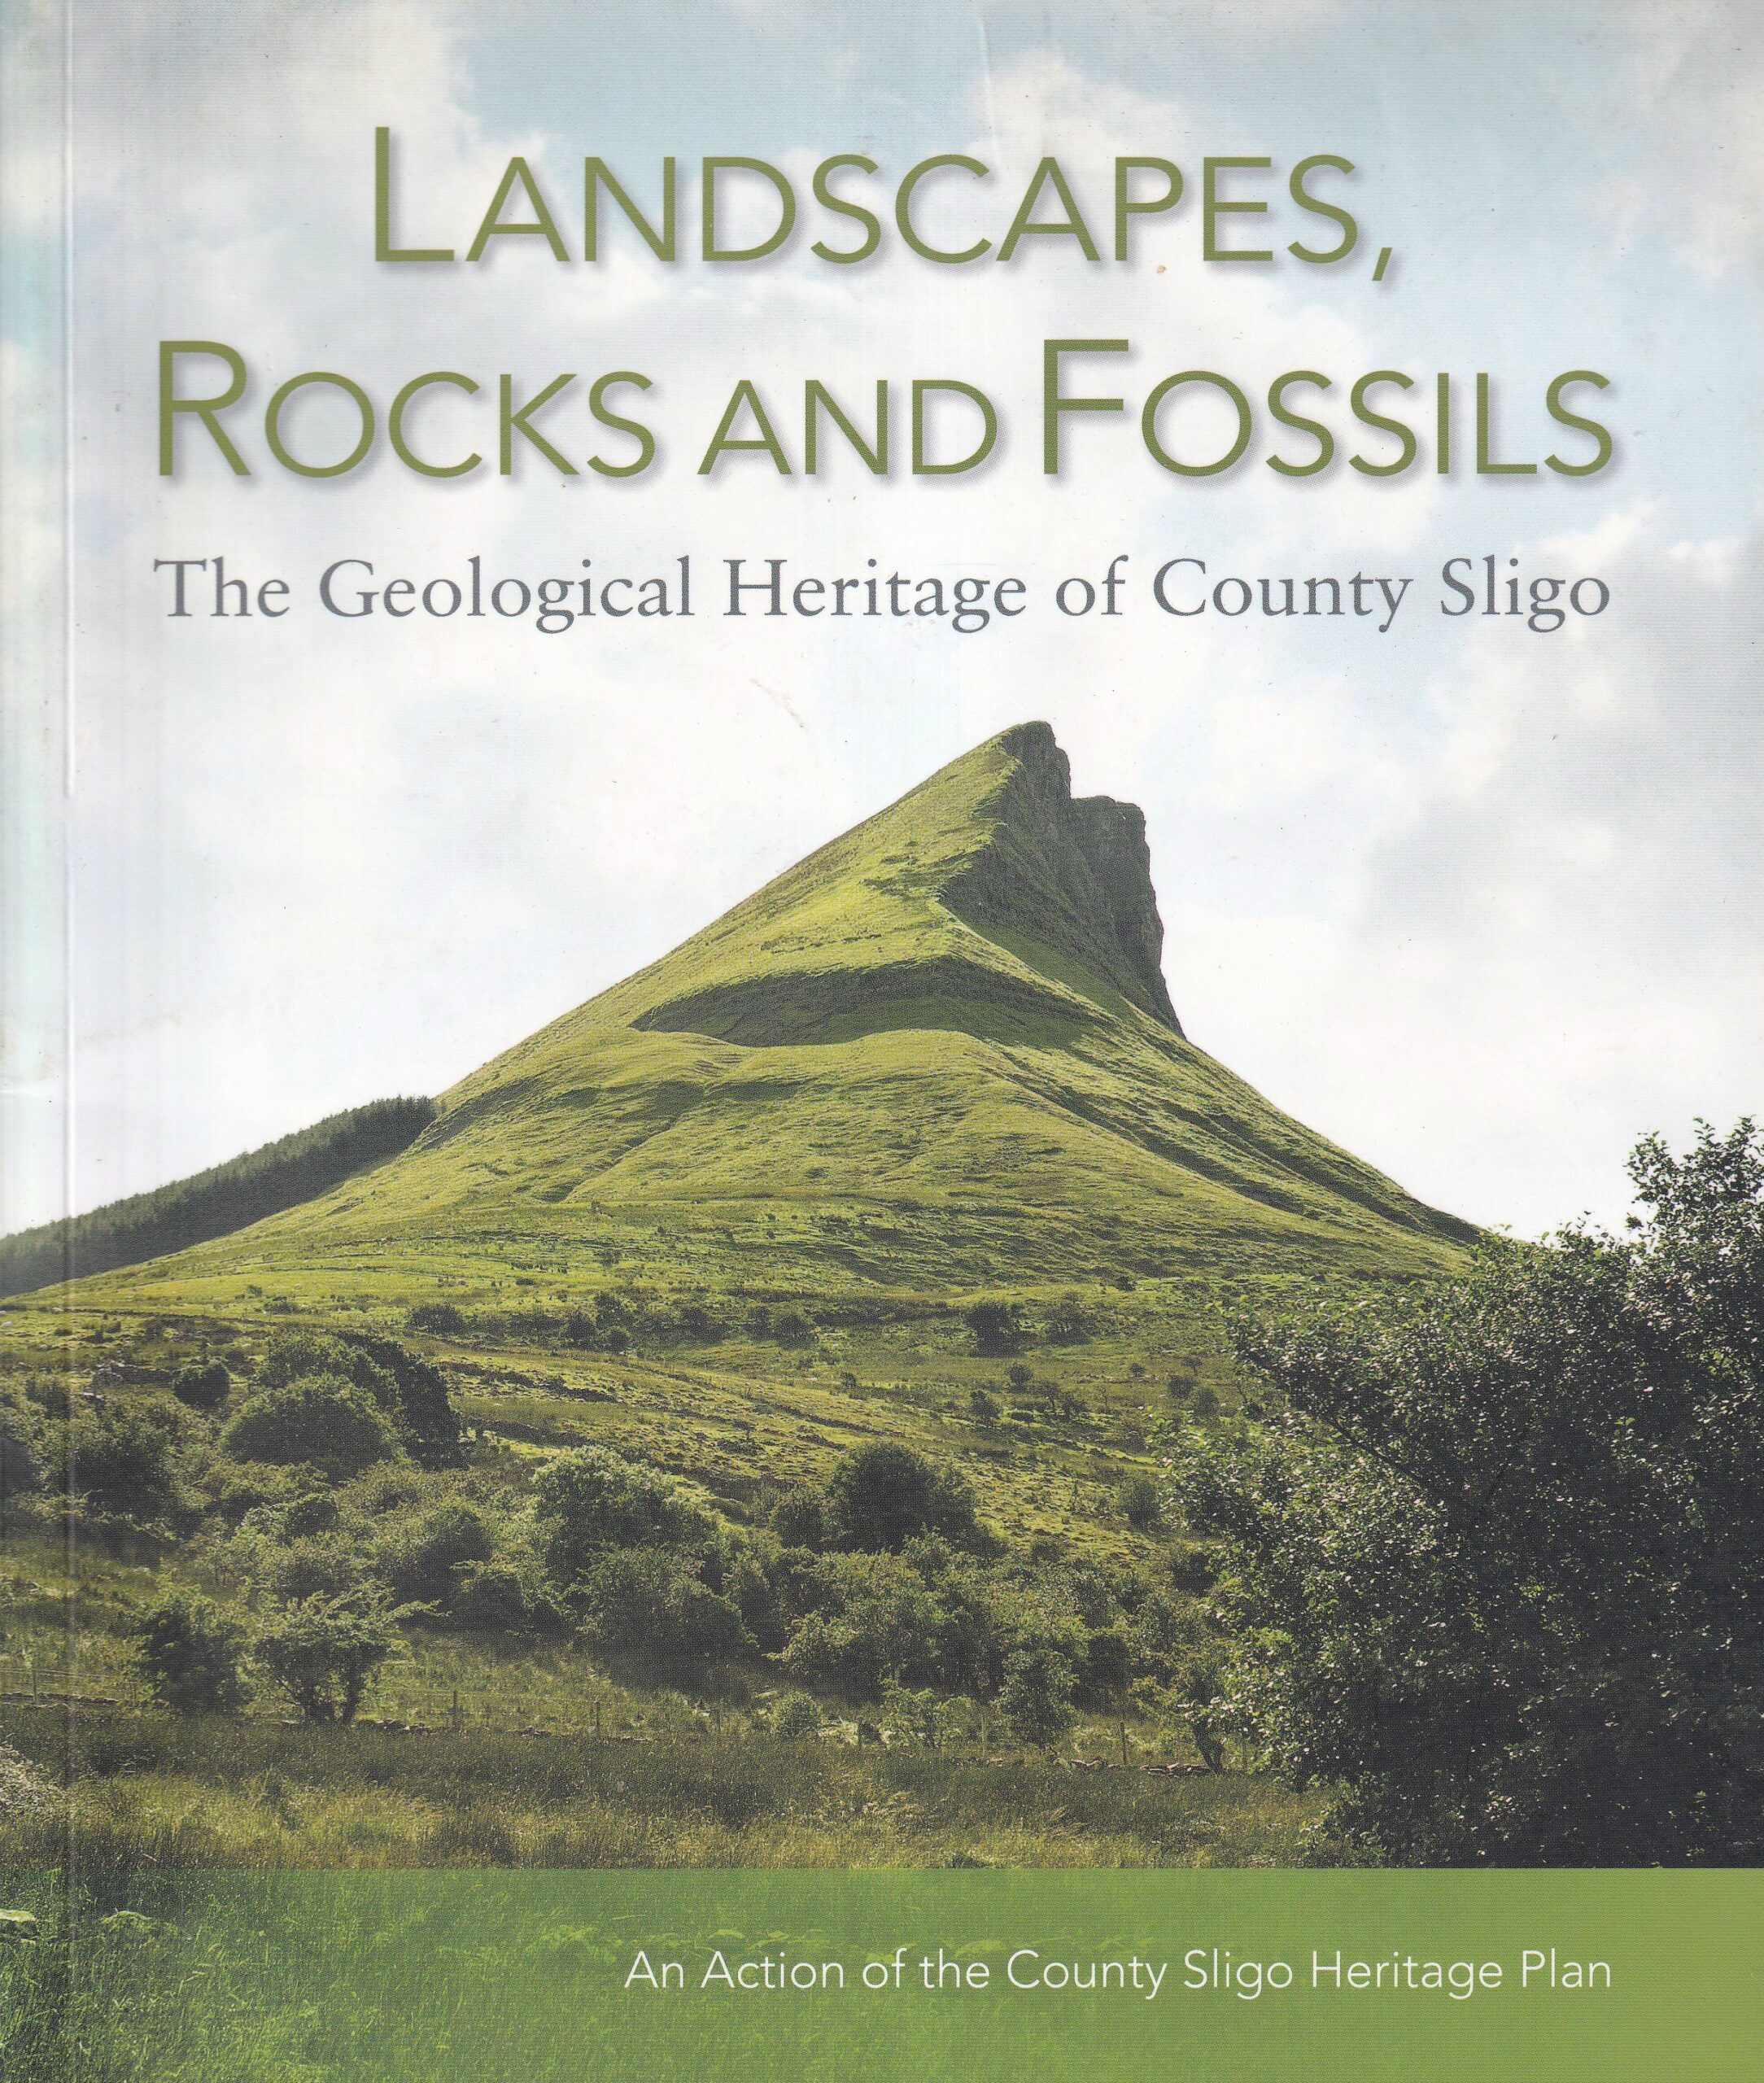 Landscapes, Rocks and Fossils: The Geological Heritage of County Sligo by Tony Bazley, Matthew Parks, Siobhán Ryan (eds.)